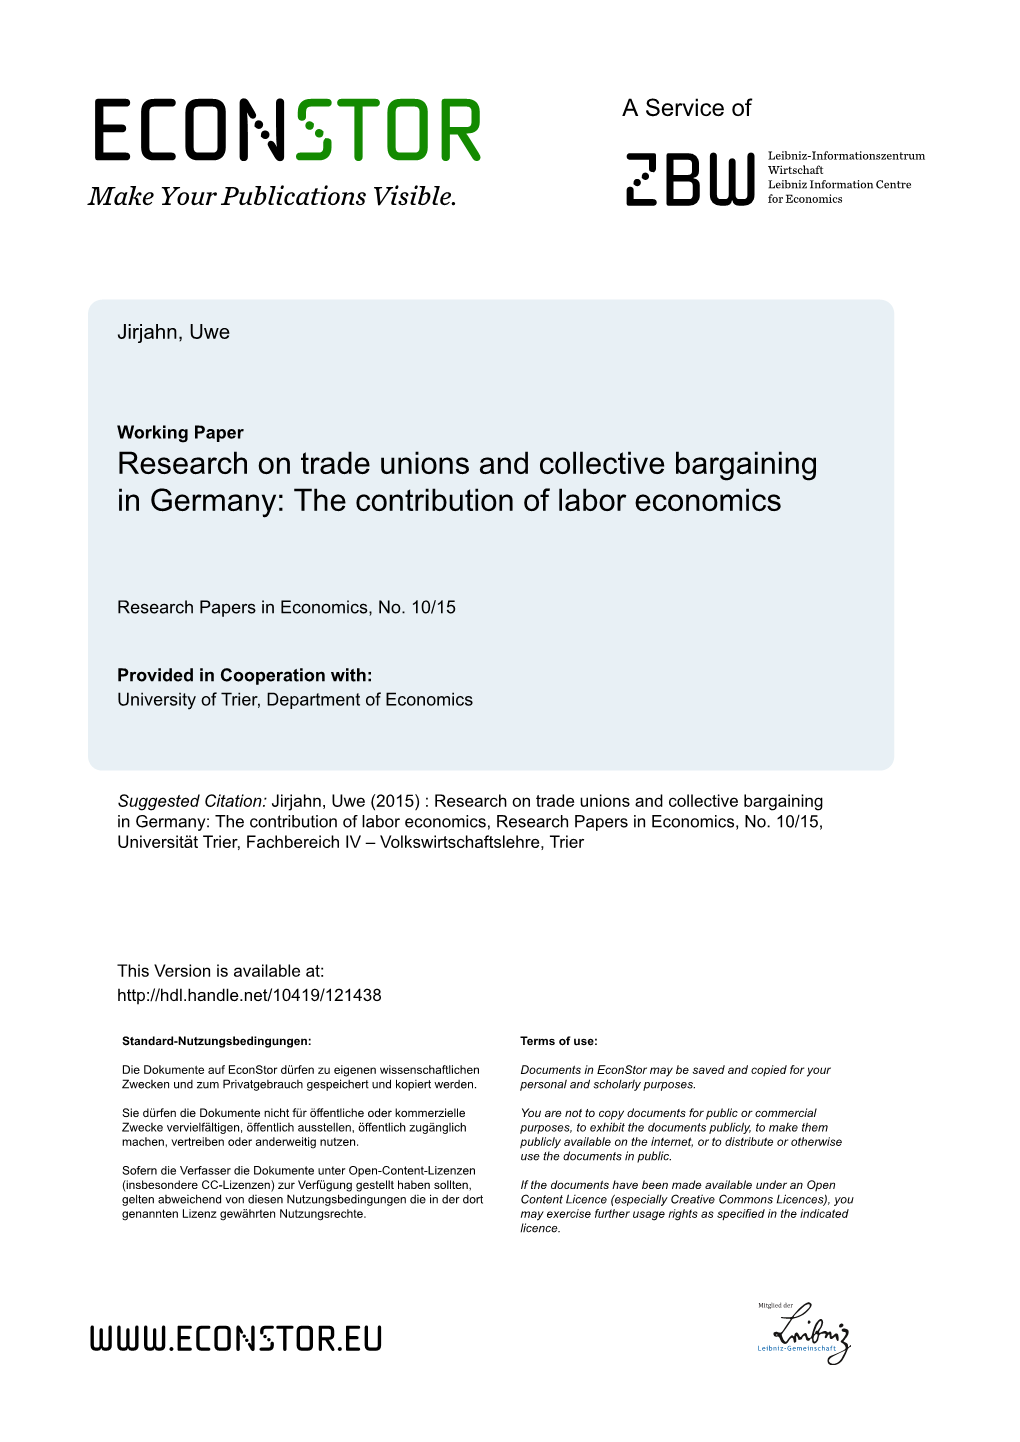 Research on Trade Unions and Collective Bargaining in Germany: the Contribution of Labor Economics